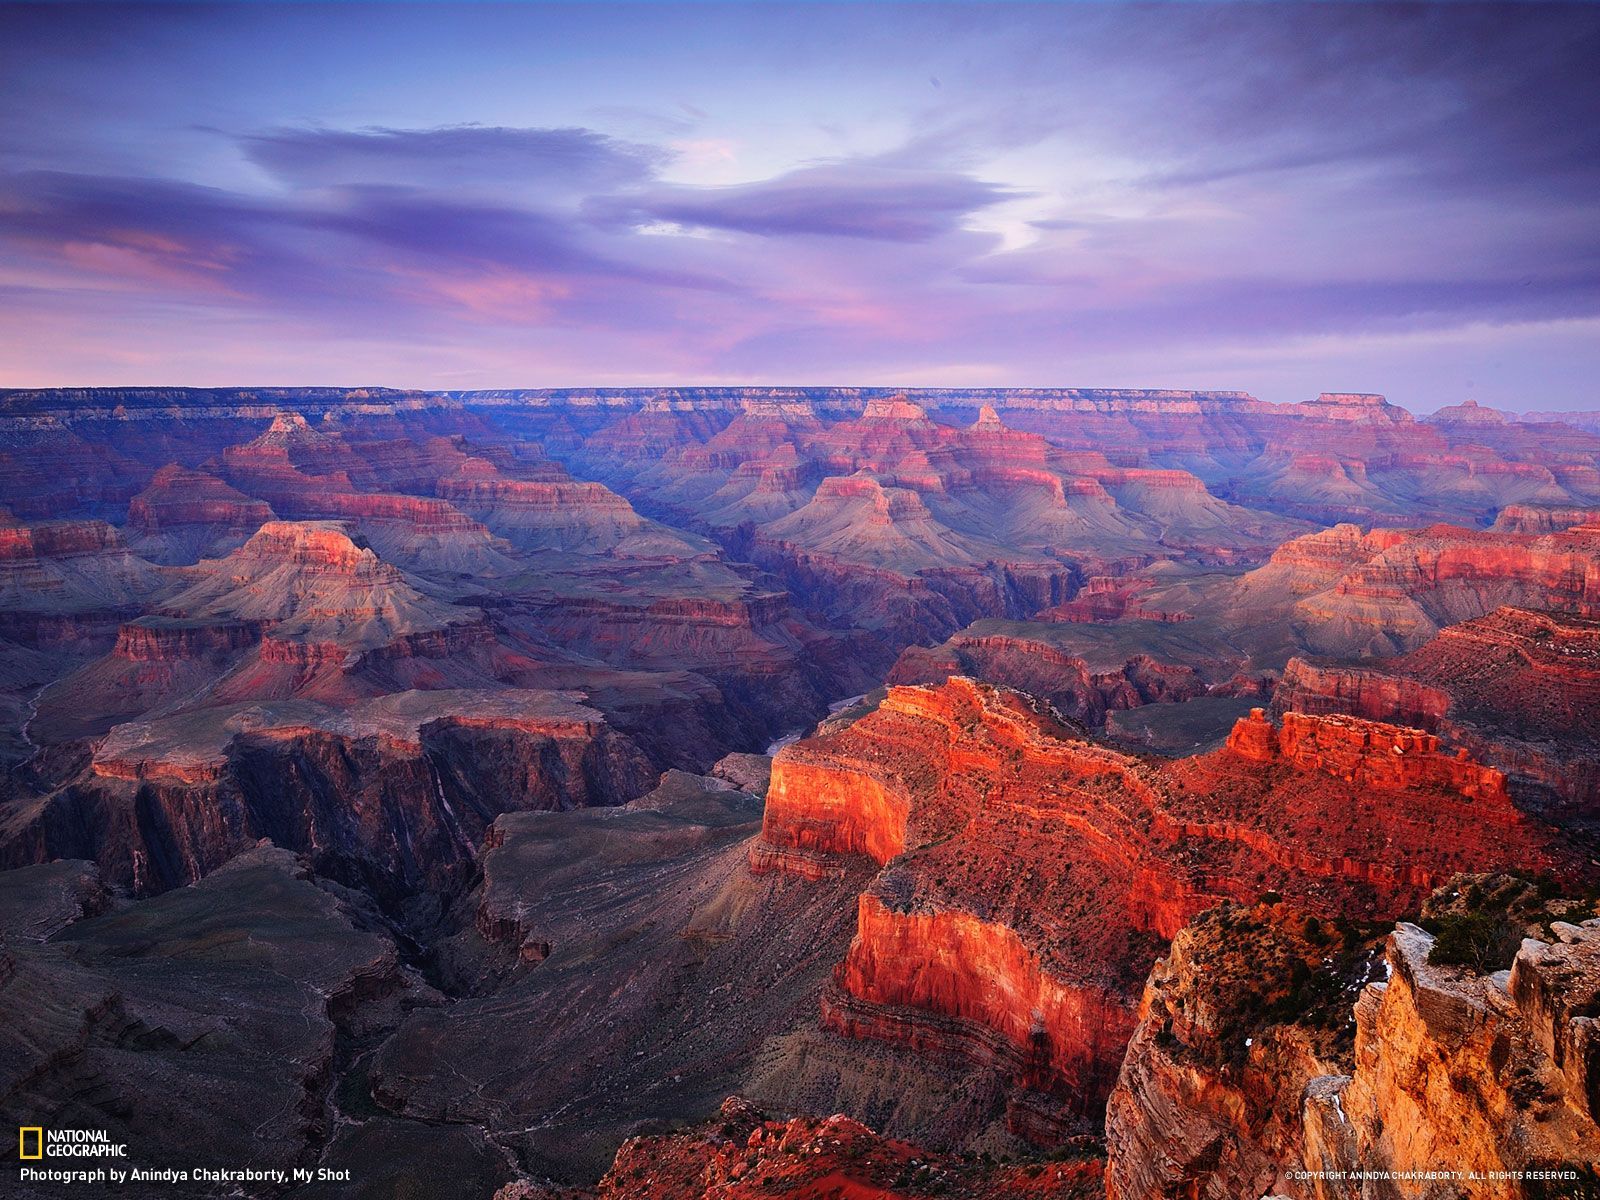 Wallpaper - National Geographic for Your National Park Picture